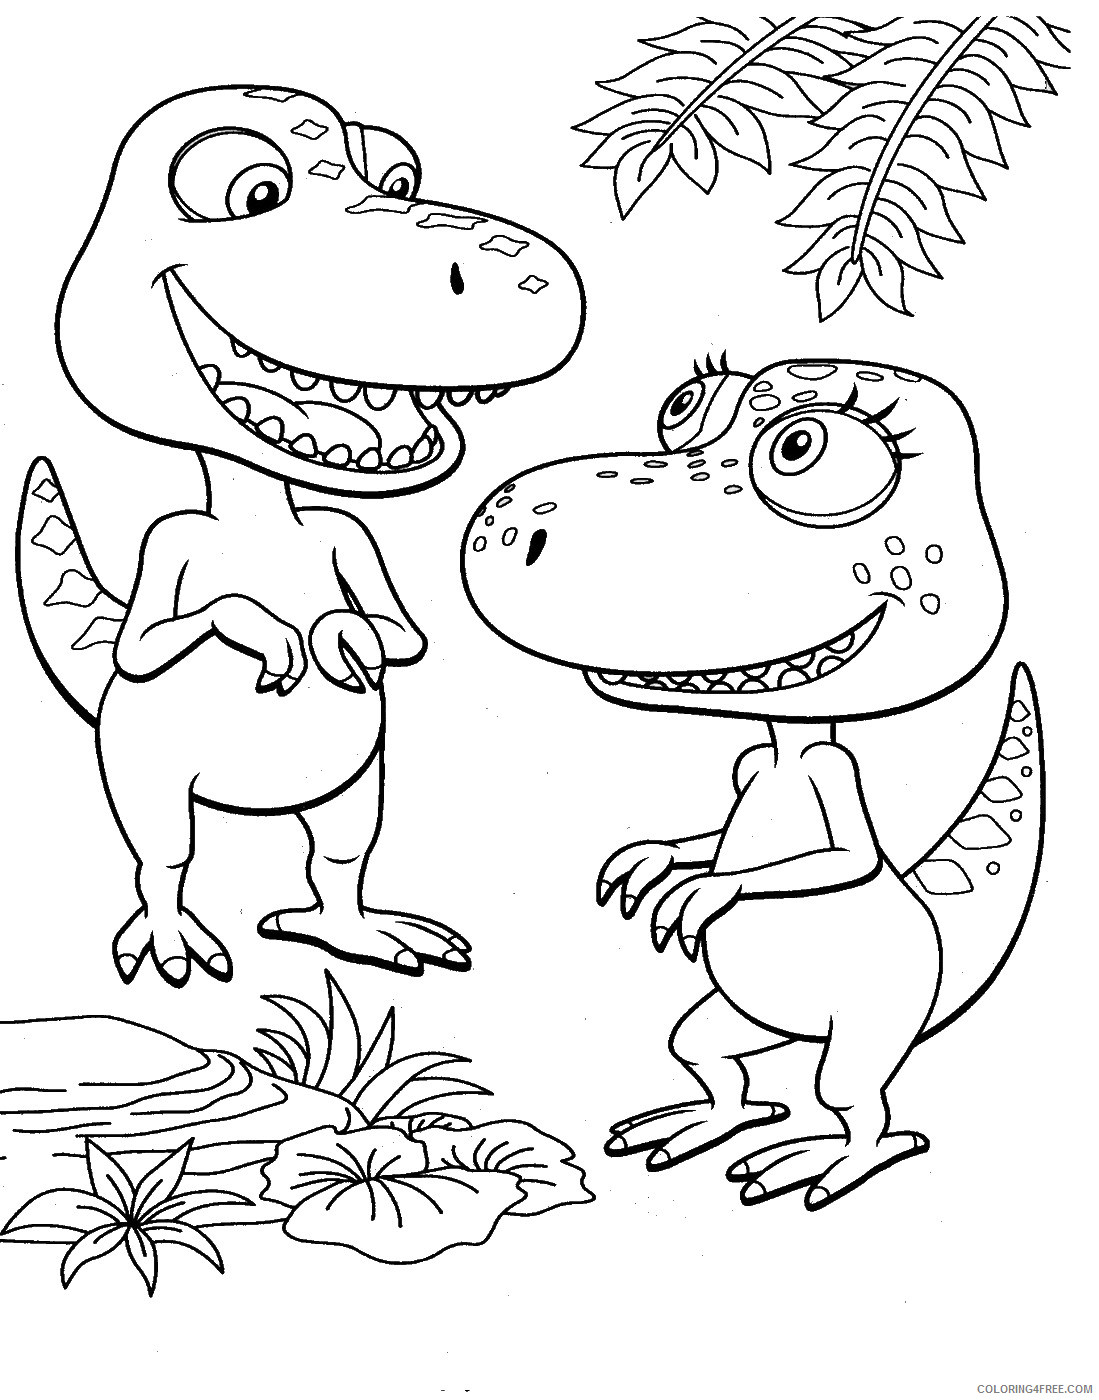 Dinosaur Train Coloring Pages Cartoons dino_train_cl_17 Printable 2020 2238 Coloring4free